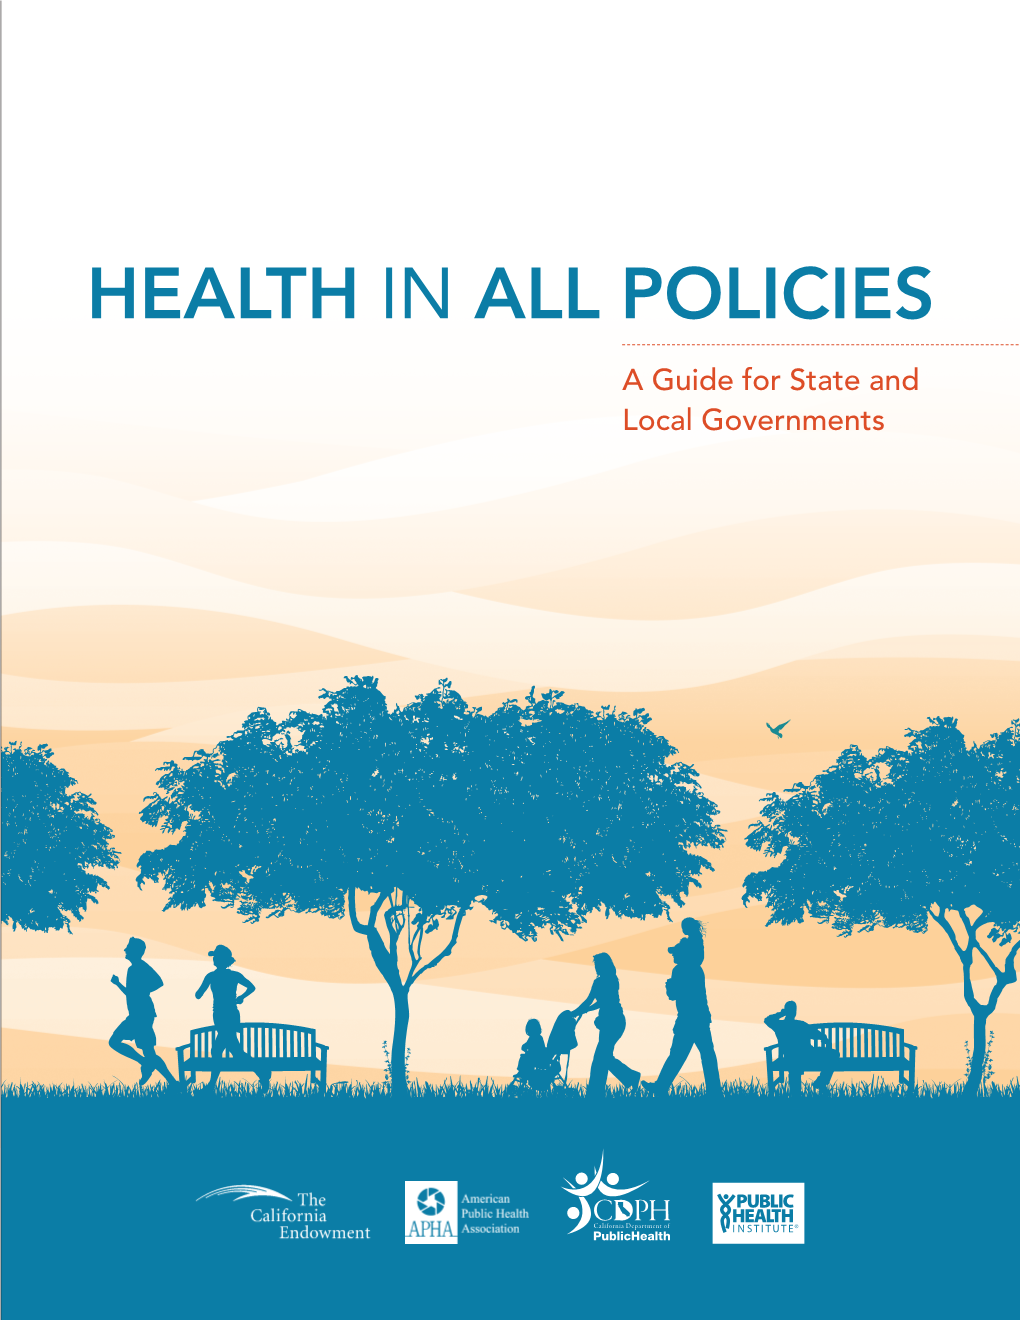 Health in All Policies: a Guide for State and Local Governments